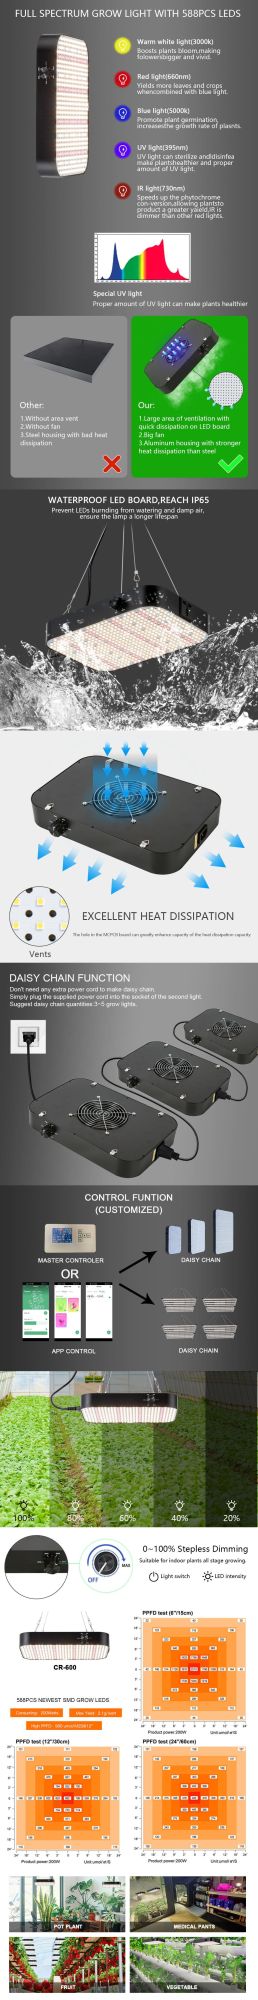 Newest Ideal Full Spectrum Plant Quantum Board for 2X2 FT Coverage, Best Growing Lamps Cr600 200W with 588PCS LEDs & Daisy China Function & Strong Cool System